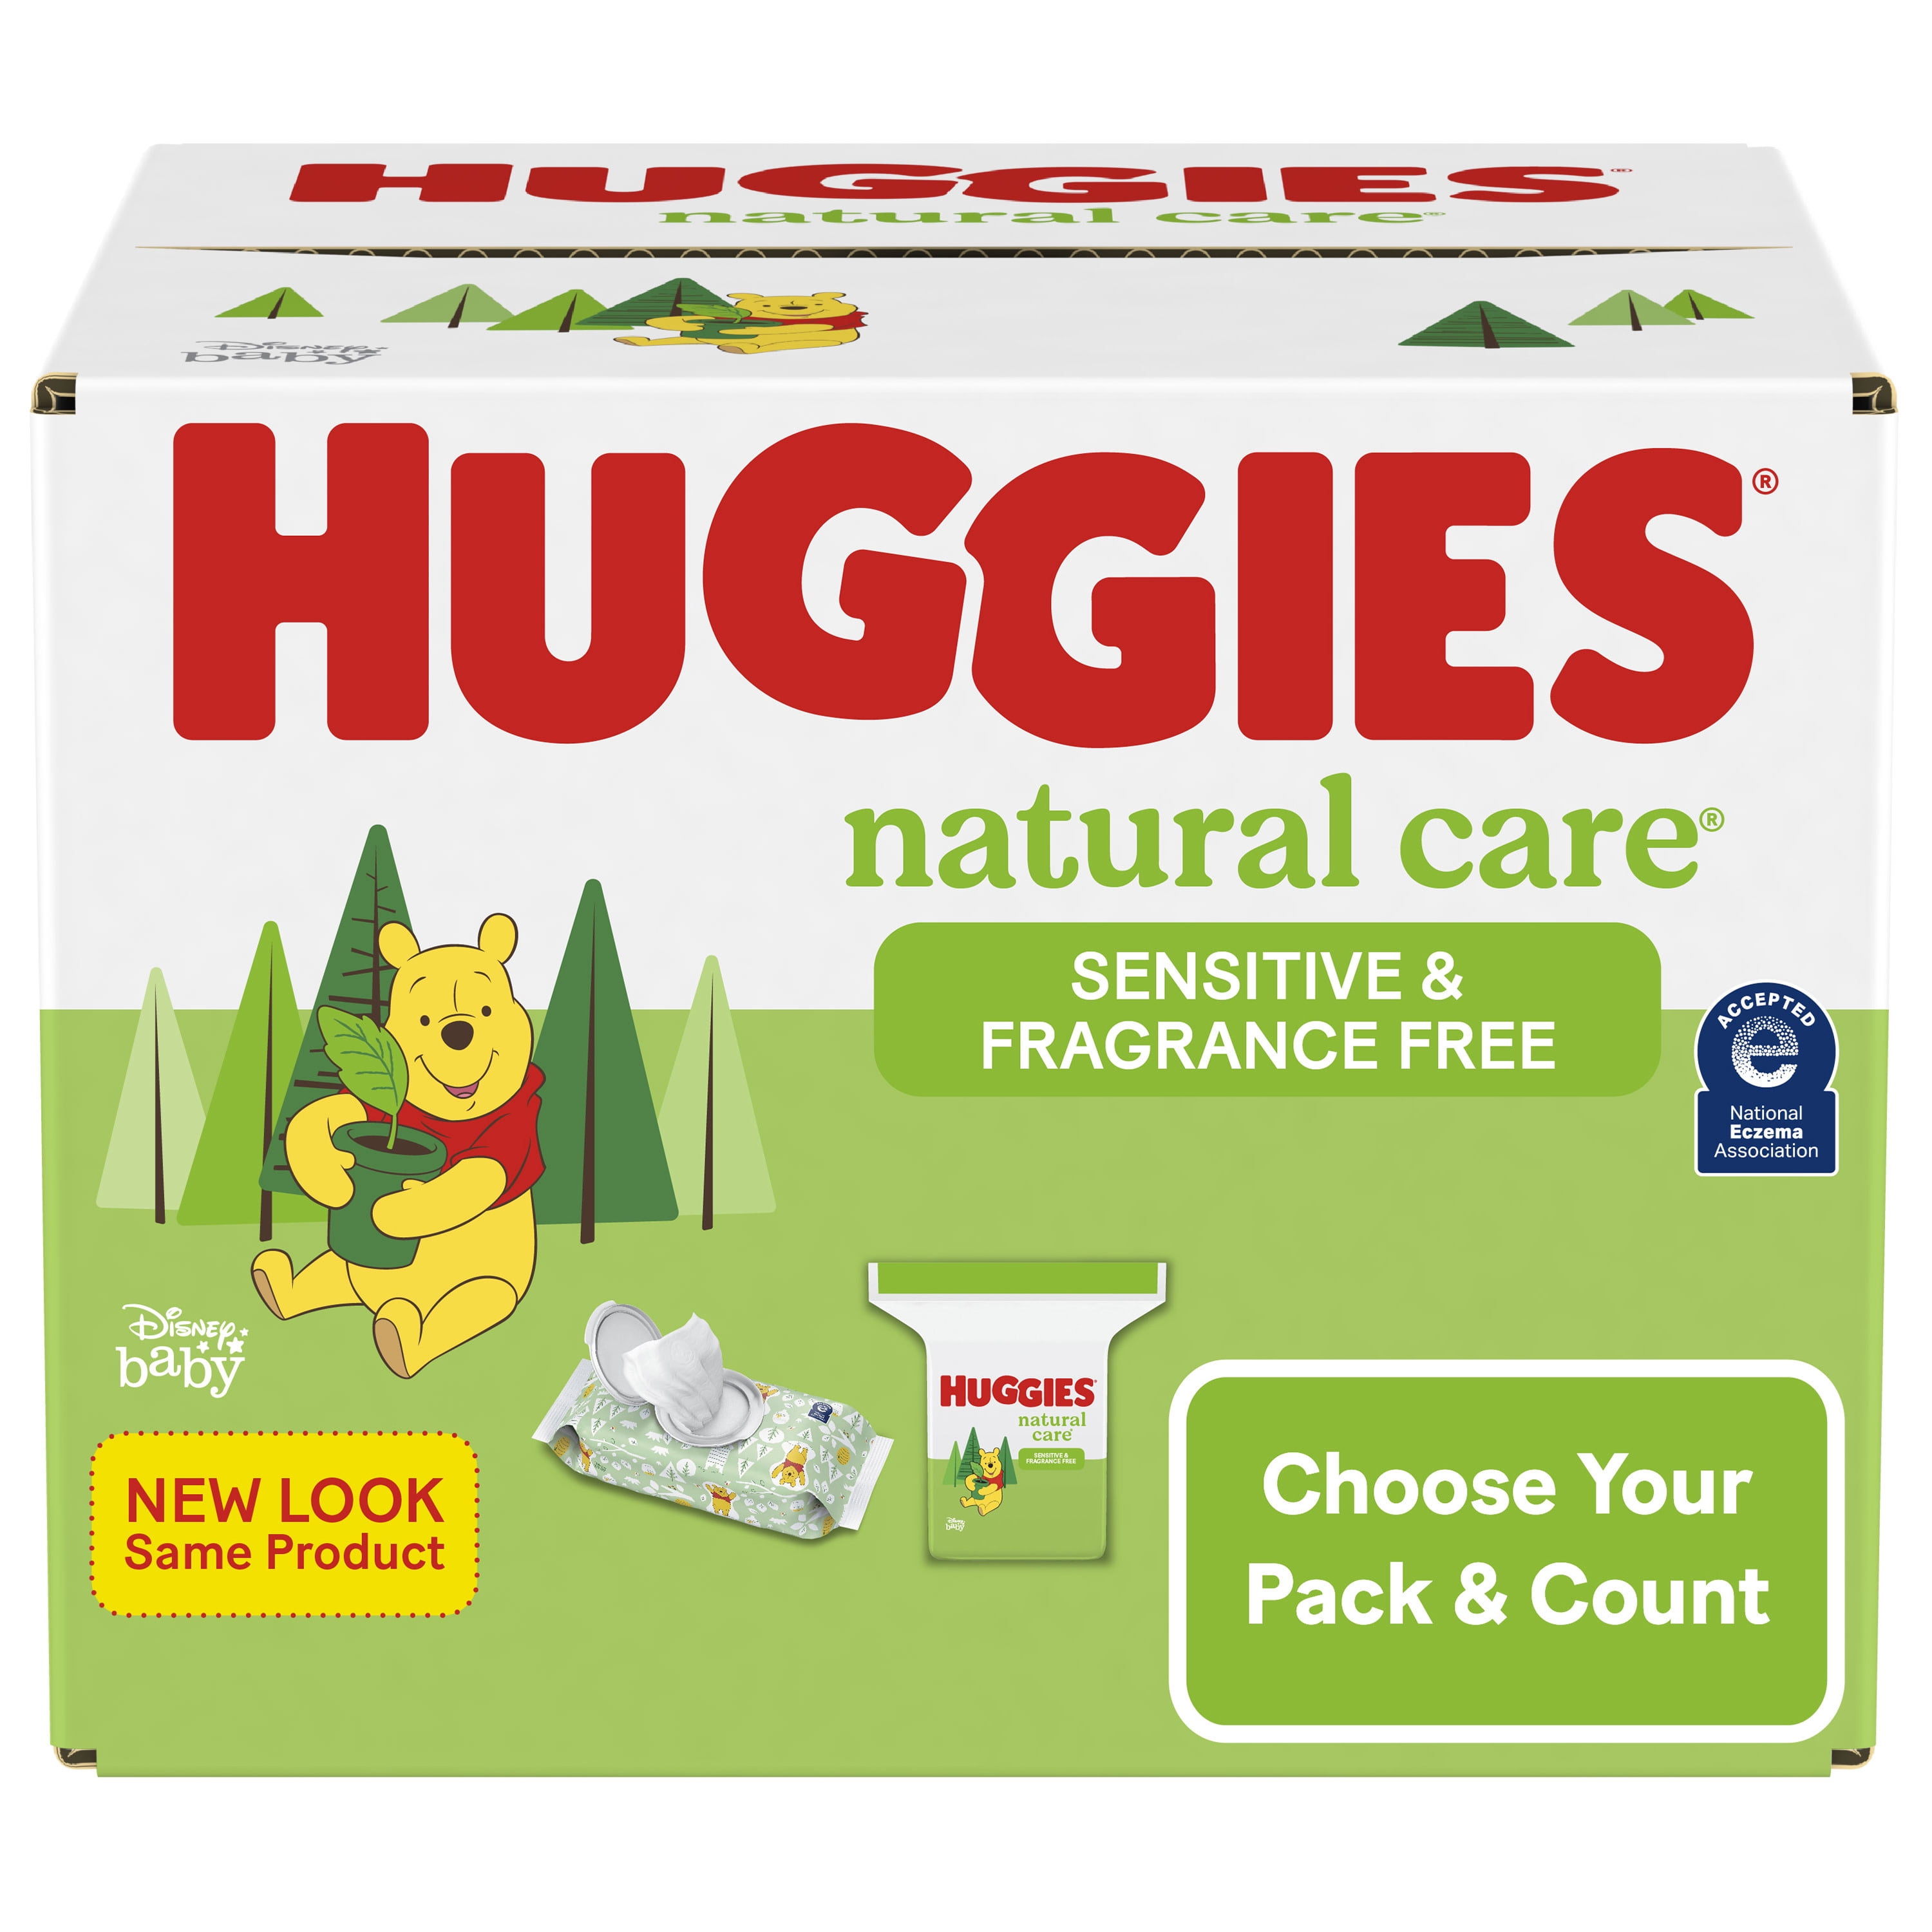 448 Wipes Sensitive 8 Flip-top Packs Huggies Natural Care Unscented Baby Wipes